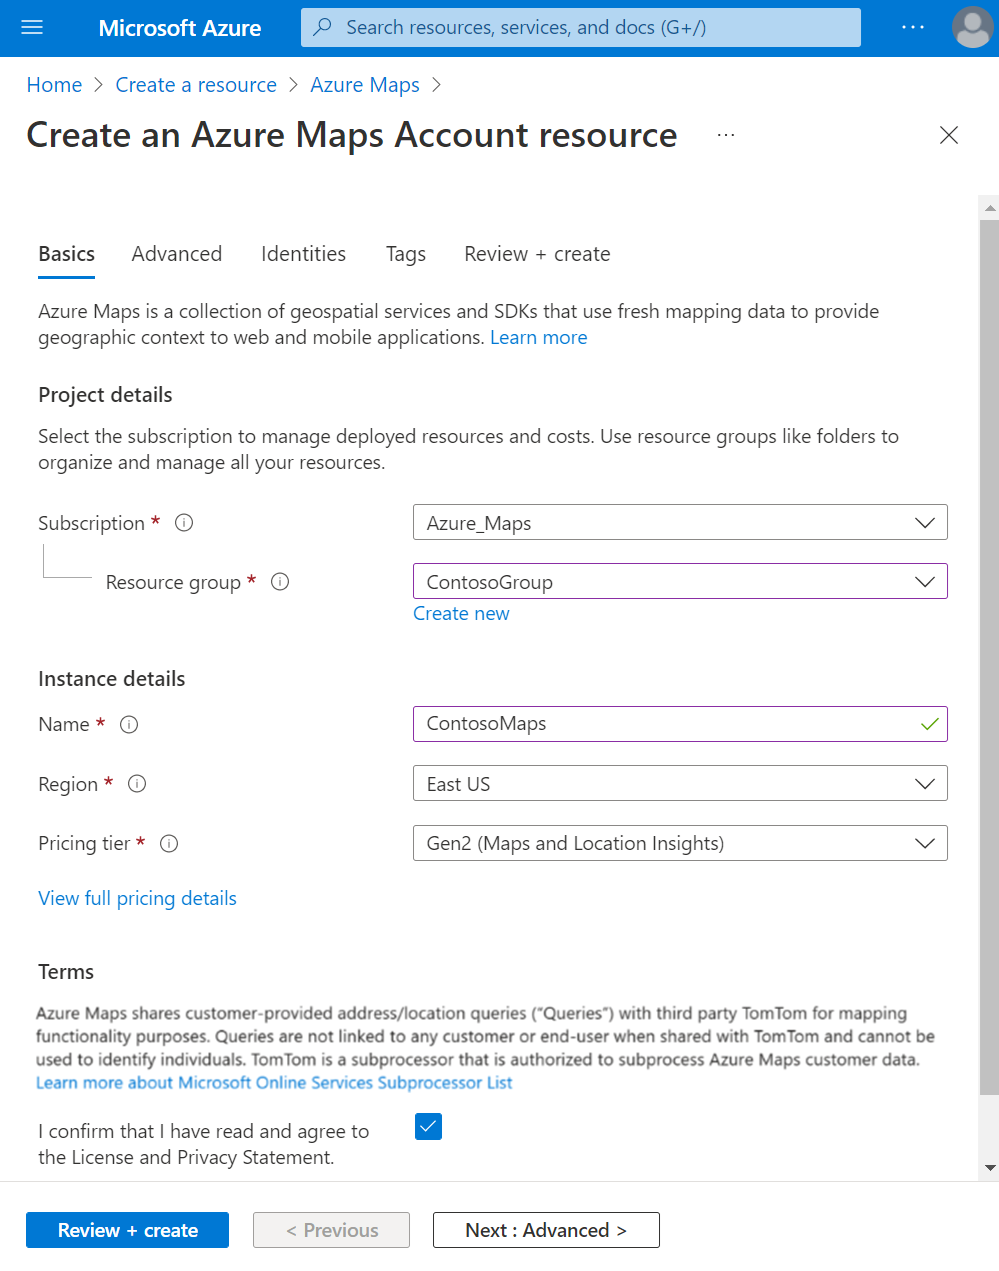 A screenshot of the Create an Azure Maps Account resource page in the Azure portal.